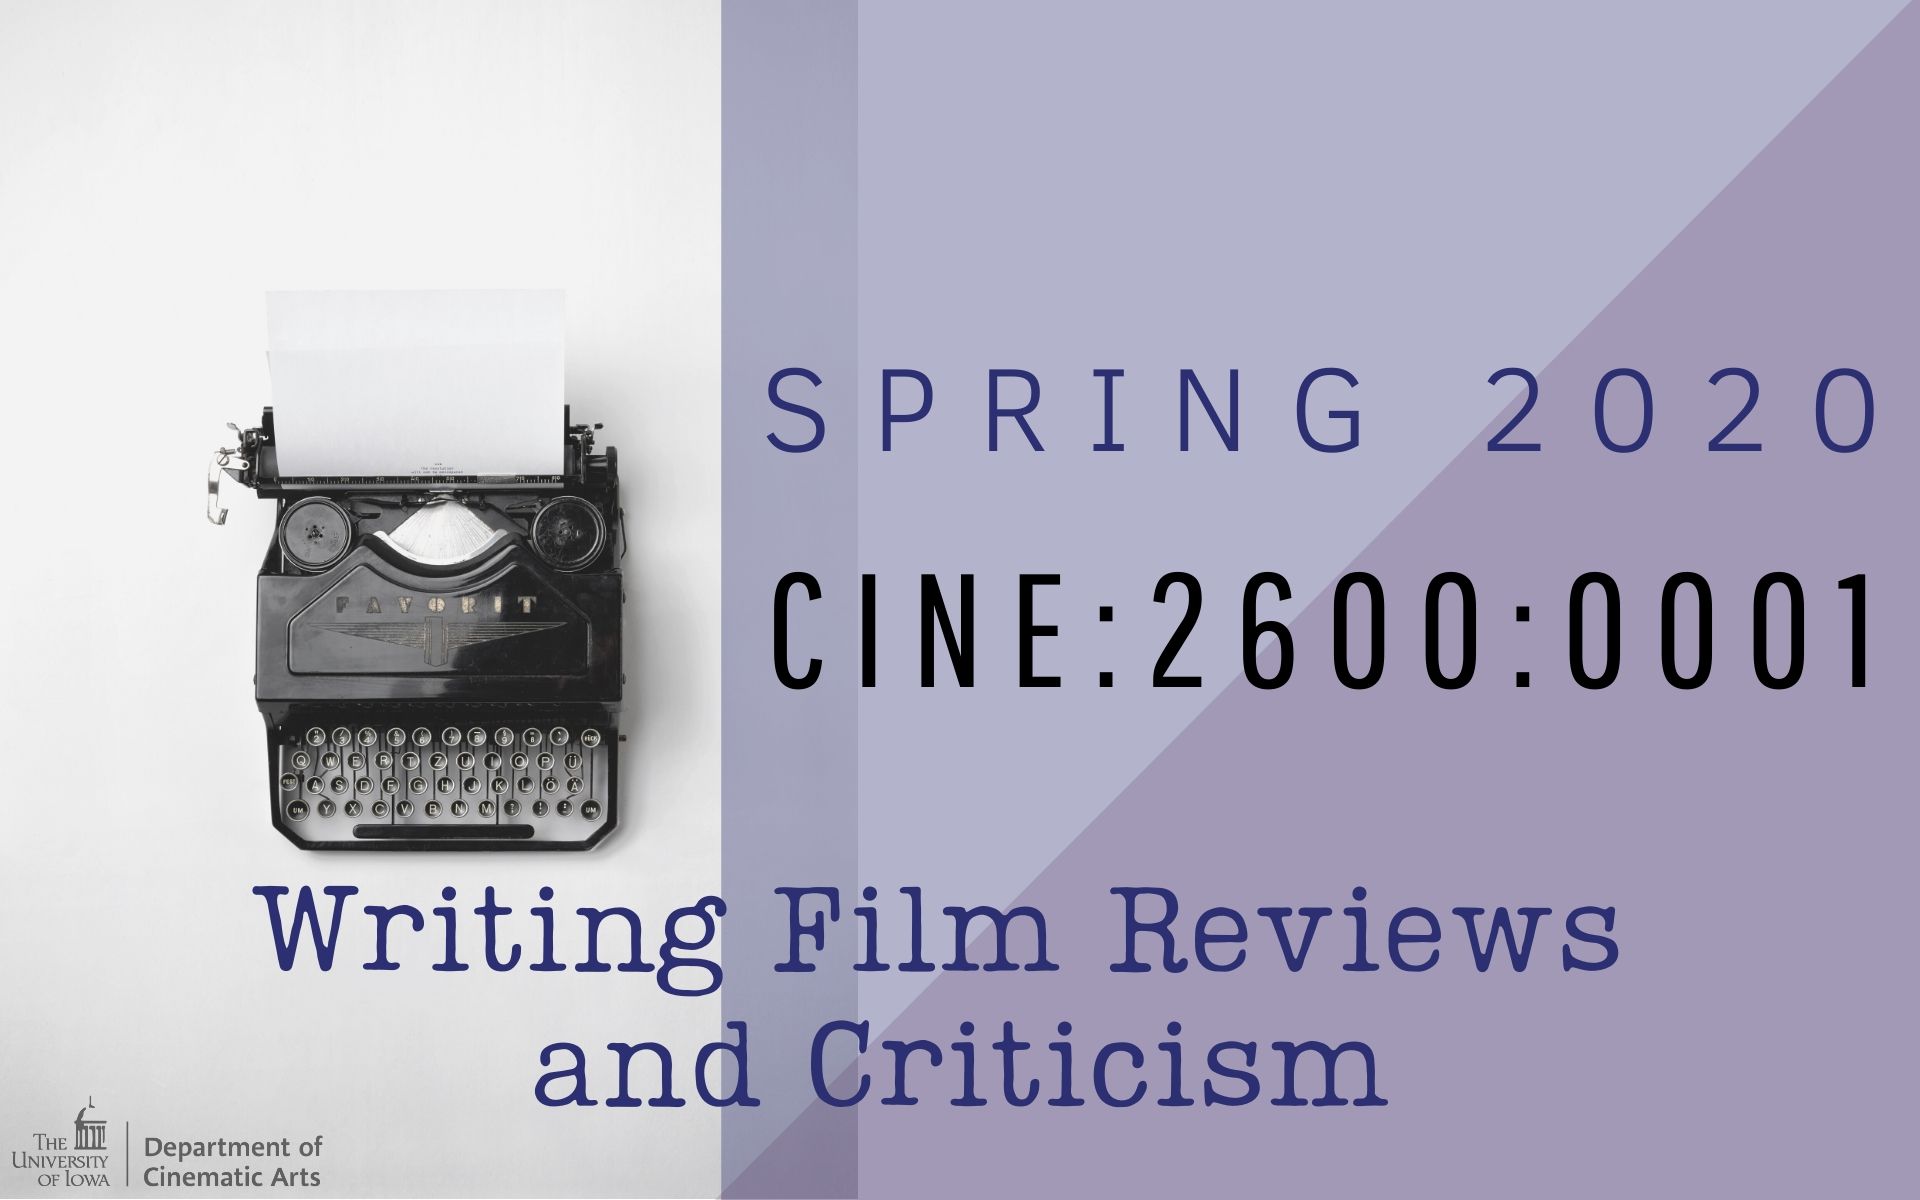 image of typewriter, text: "writing film reviews and criticism"